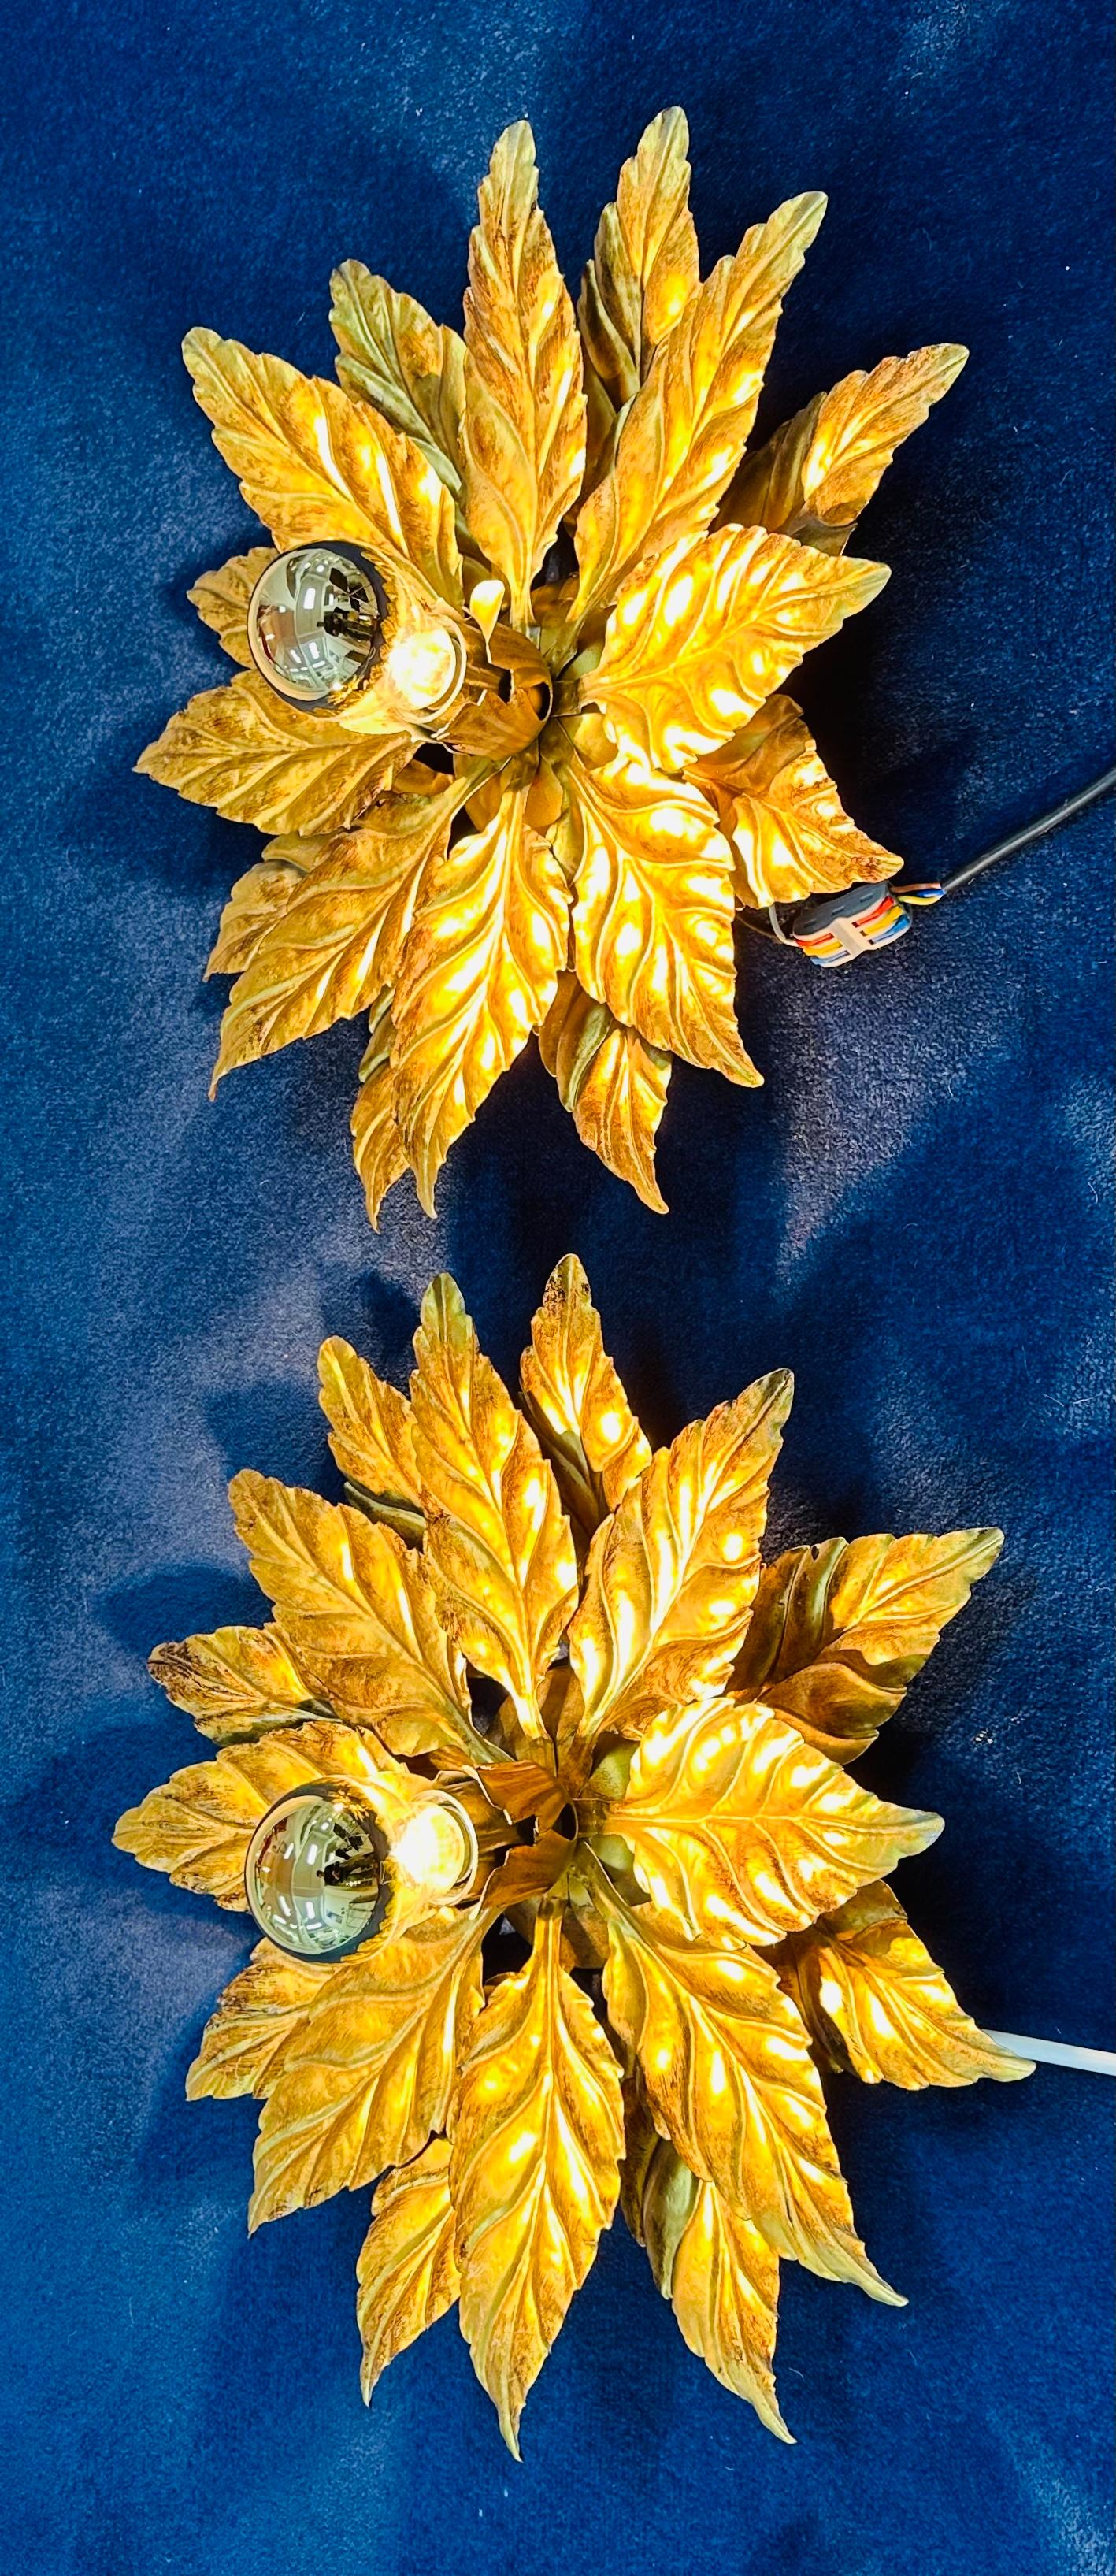 Pair of rather glamorous golden-era Hollywood Regency 1980s gold-gilded metal floral wall lights or sconces designed by Hans Kögl.  Manufactured by Kögl Wohnlicht, Hans Kögl e.Kfm., Schloßplatz 3, 83123 Amerang, Germany.  The wall lights which could